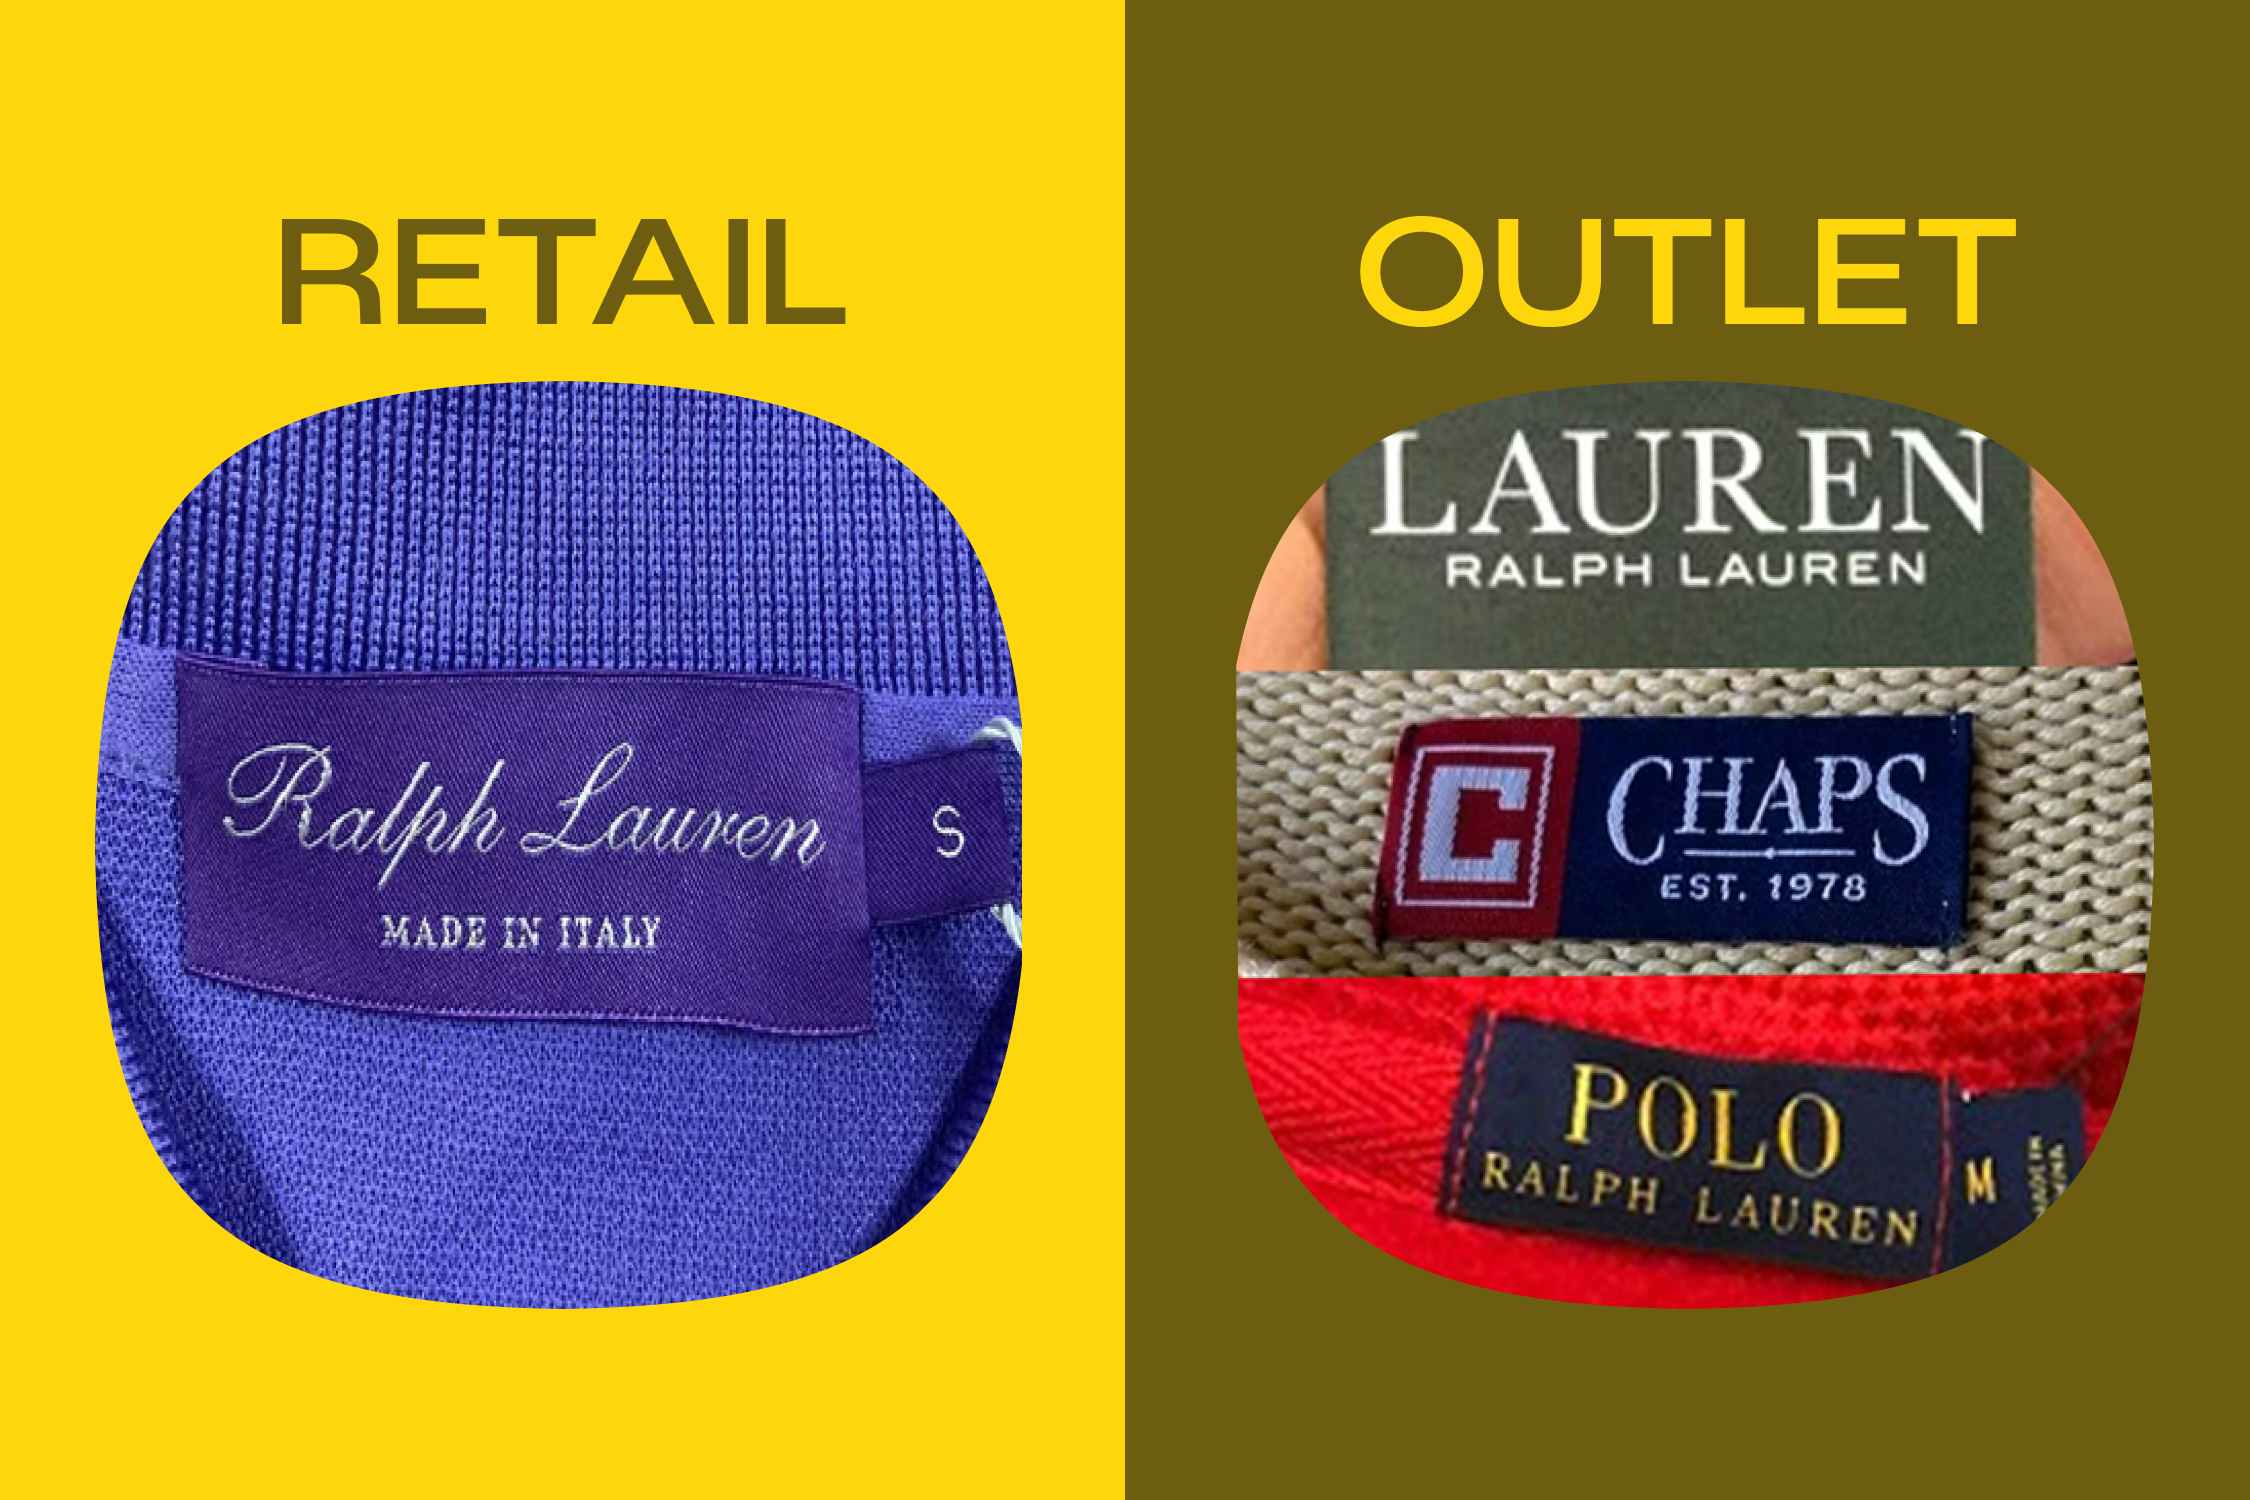 an example of a retail and outlet version of Ralph Lauren items